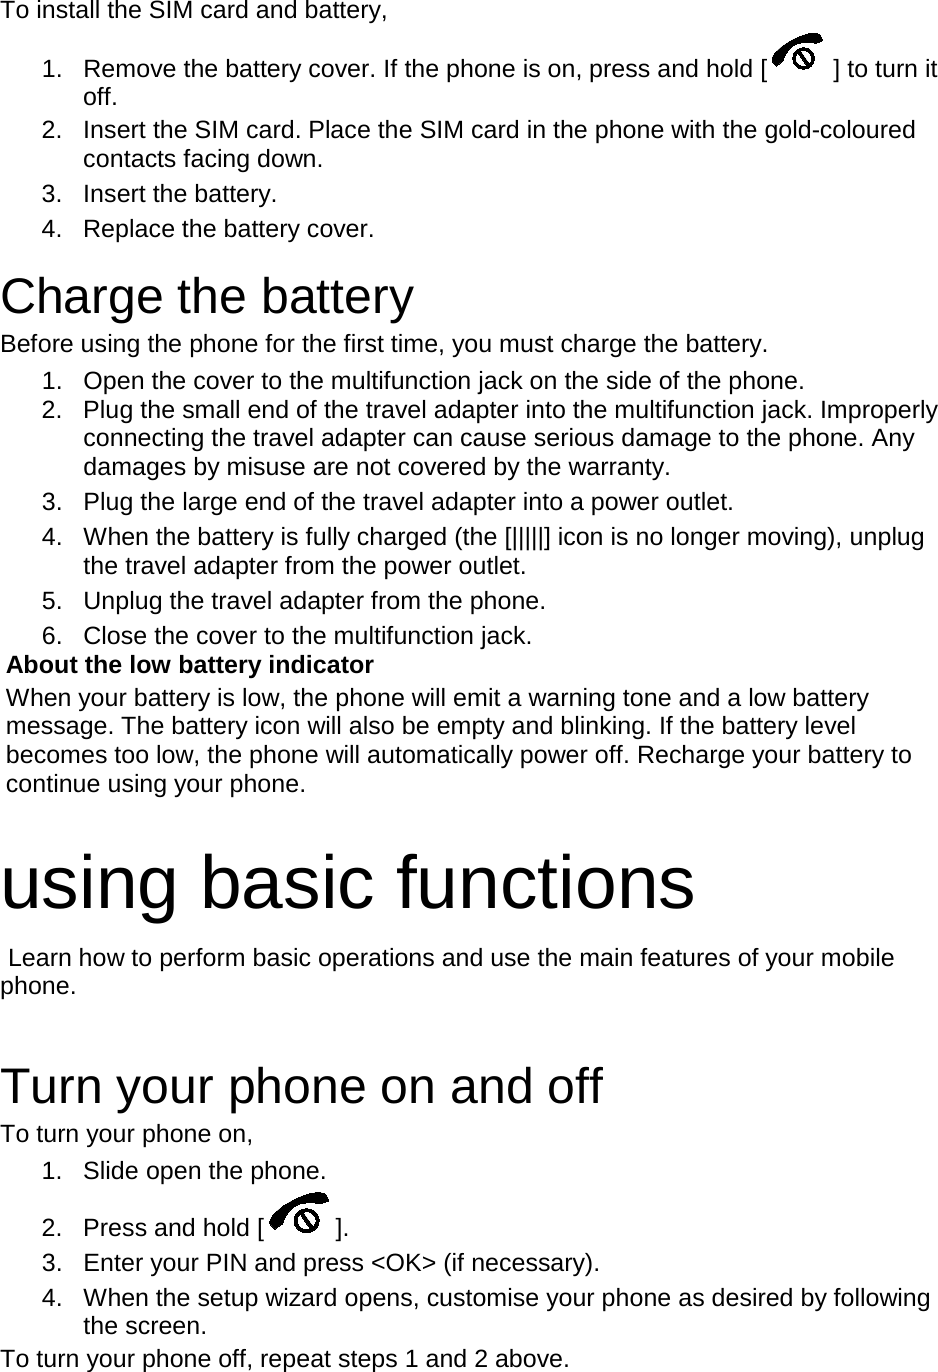 To install the SIM card and battery, 1. Remove the battery cover. If the phone is on, press and hold [ ] to turn it off. 2. Insert the SIM card. Place the SIM card in the phone with the gold-coloured contacts facing down. 3. Insert the battery. 4. Replace the battery cover.  Charge the battery Before using the phone for the first time, you must charge the battery. 1. Open the cover to the multifunction jack on the side of the phone. 2. Plug the small end of the travel adapter into the multifunction jack. Improperly connecting the travel adapter can cause serious damage to the phone. Any damages by misuse are not covered by the warranty. 3. Plug the large end of the travel adapter into a power outlet. 4. When the battery is fully charged (the [|||||] icon is no longer moving), unplug the travel adapter from the power outlet. 5. Unplug the travel adapter from the phone. 6. Close the cover to the multifunction jack. About the low battery indicator When your battery is low, the phone will emit a warning tone and a low battery message. The battery icon will also be empty and blinking. If the battery level becomes too low, the phone will automatically power off. Recharge your battery to continue using your phone.  using basic functions  Learn how to perform basic operations and use the main features of your mobile phone.    Turn your phone on and off To turn your phone on, 1. Slide open the phone. 2. Press and hold [ ]. 3. Enter your PIN and press &lt;OK&gt; (if necessary). 4. When the setup wizard opens, customise your phone as desired by following the screen. To turn your phone off, repeat steps 1 and 2 above.  